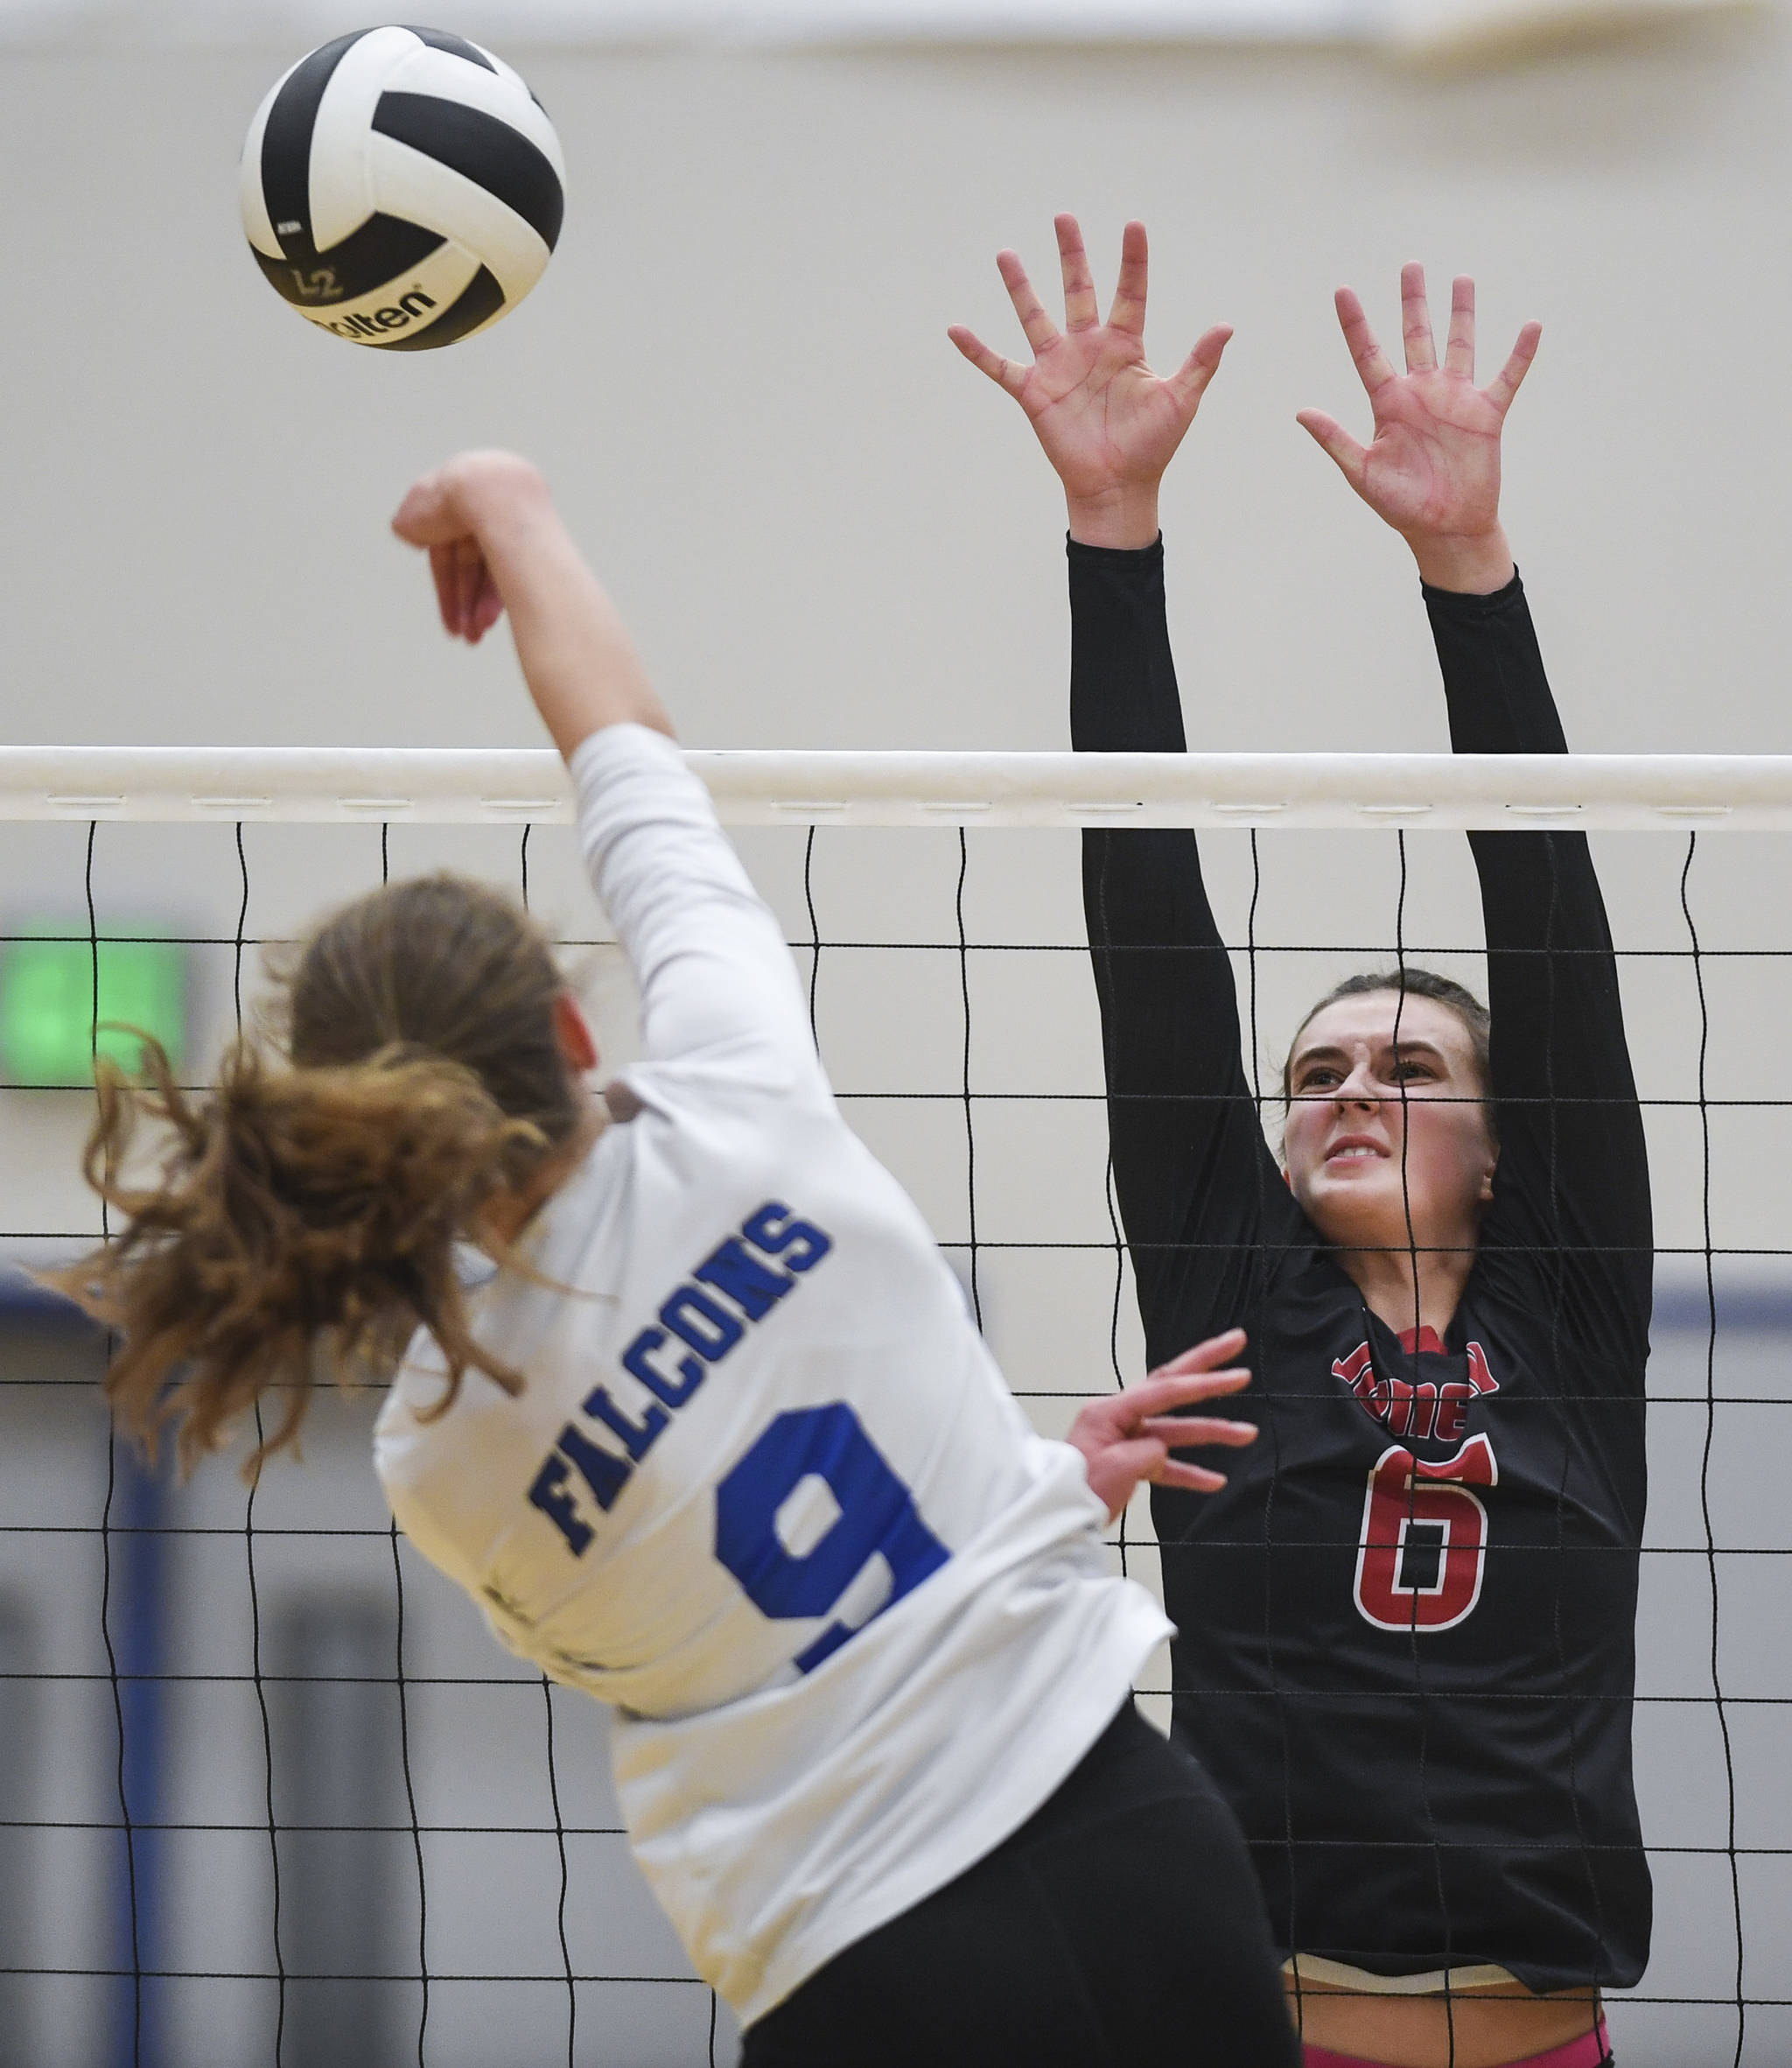 Juneau-Douglas’ Addie Prussing, right, attempts a block against Thunder Mountain’s Sophia Harvey at Thunder Mountain High School on Friday, Oct. 4, 2019. (Michael Penn | Juneau Empire)